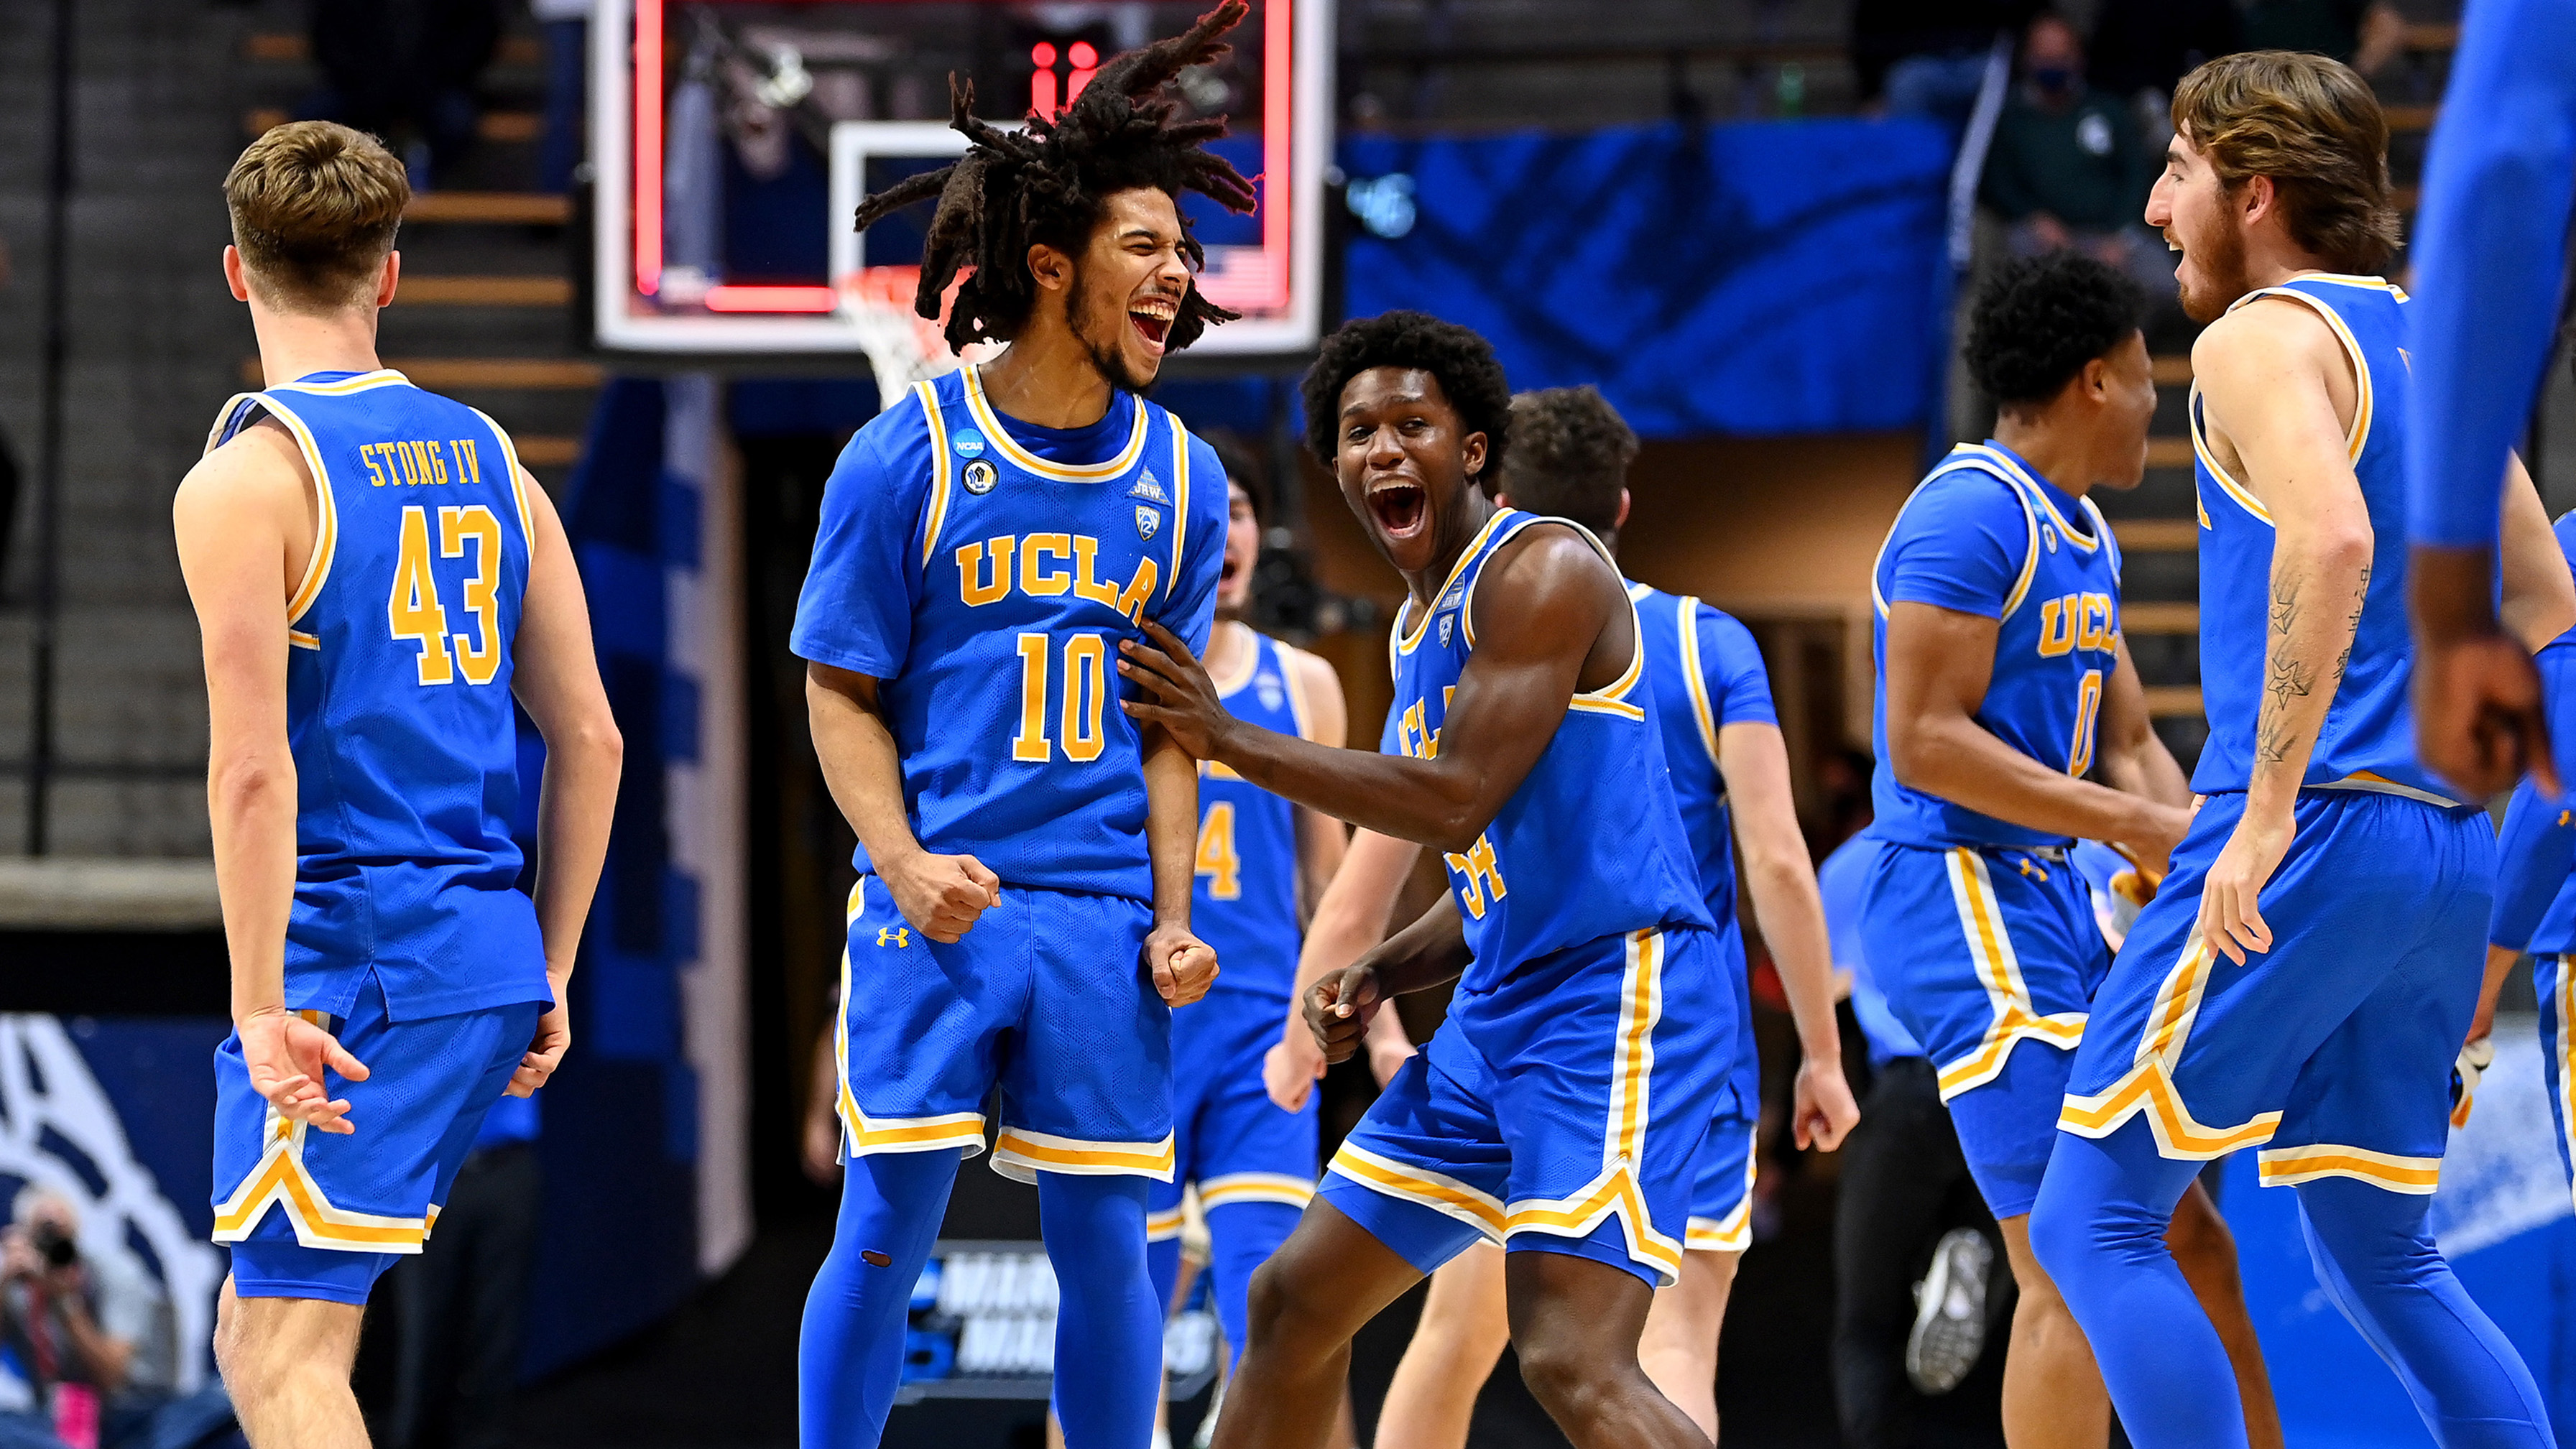 Good luck to @uclambb in the NCAA Tournament and to @uclawbb in